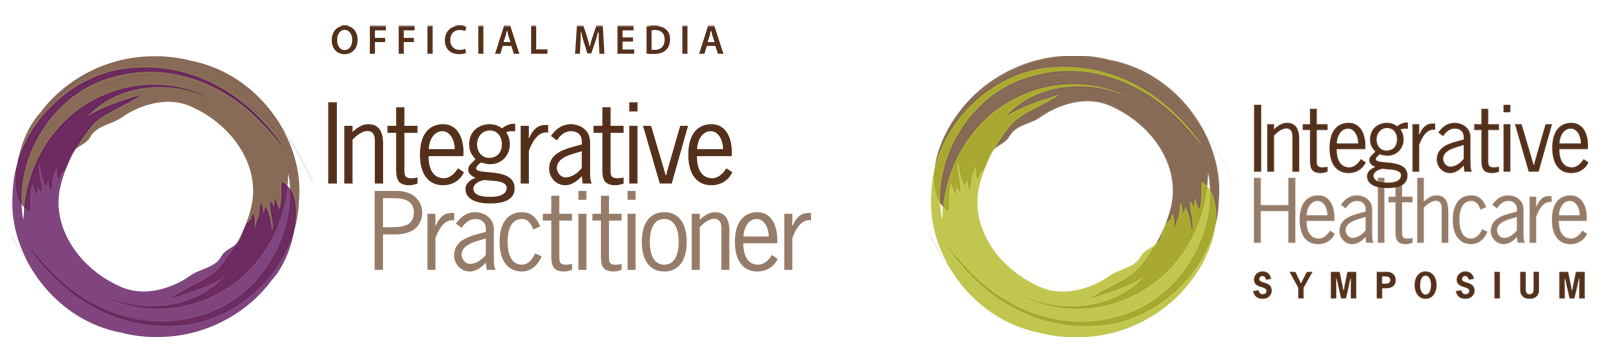 Integrative Practitioner is the Official Media of the Integrative Healthcare Symposium